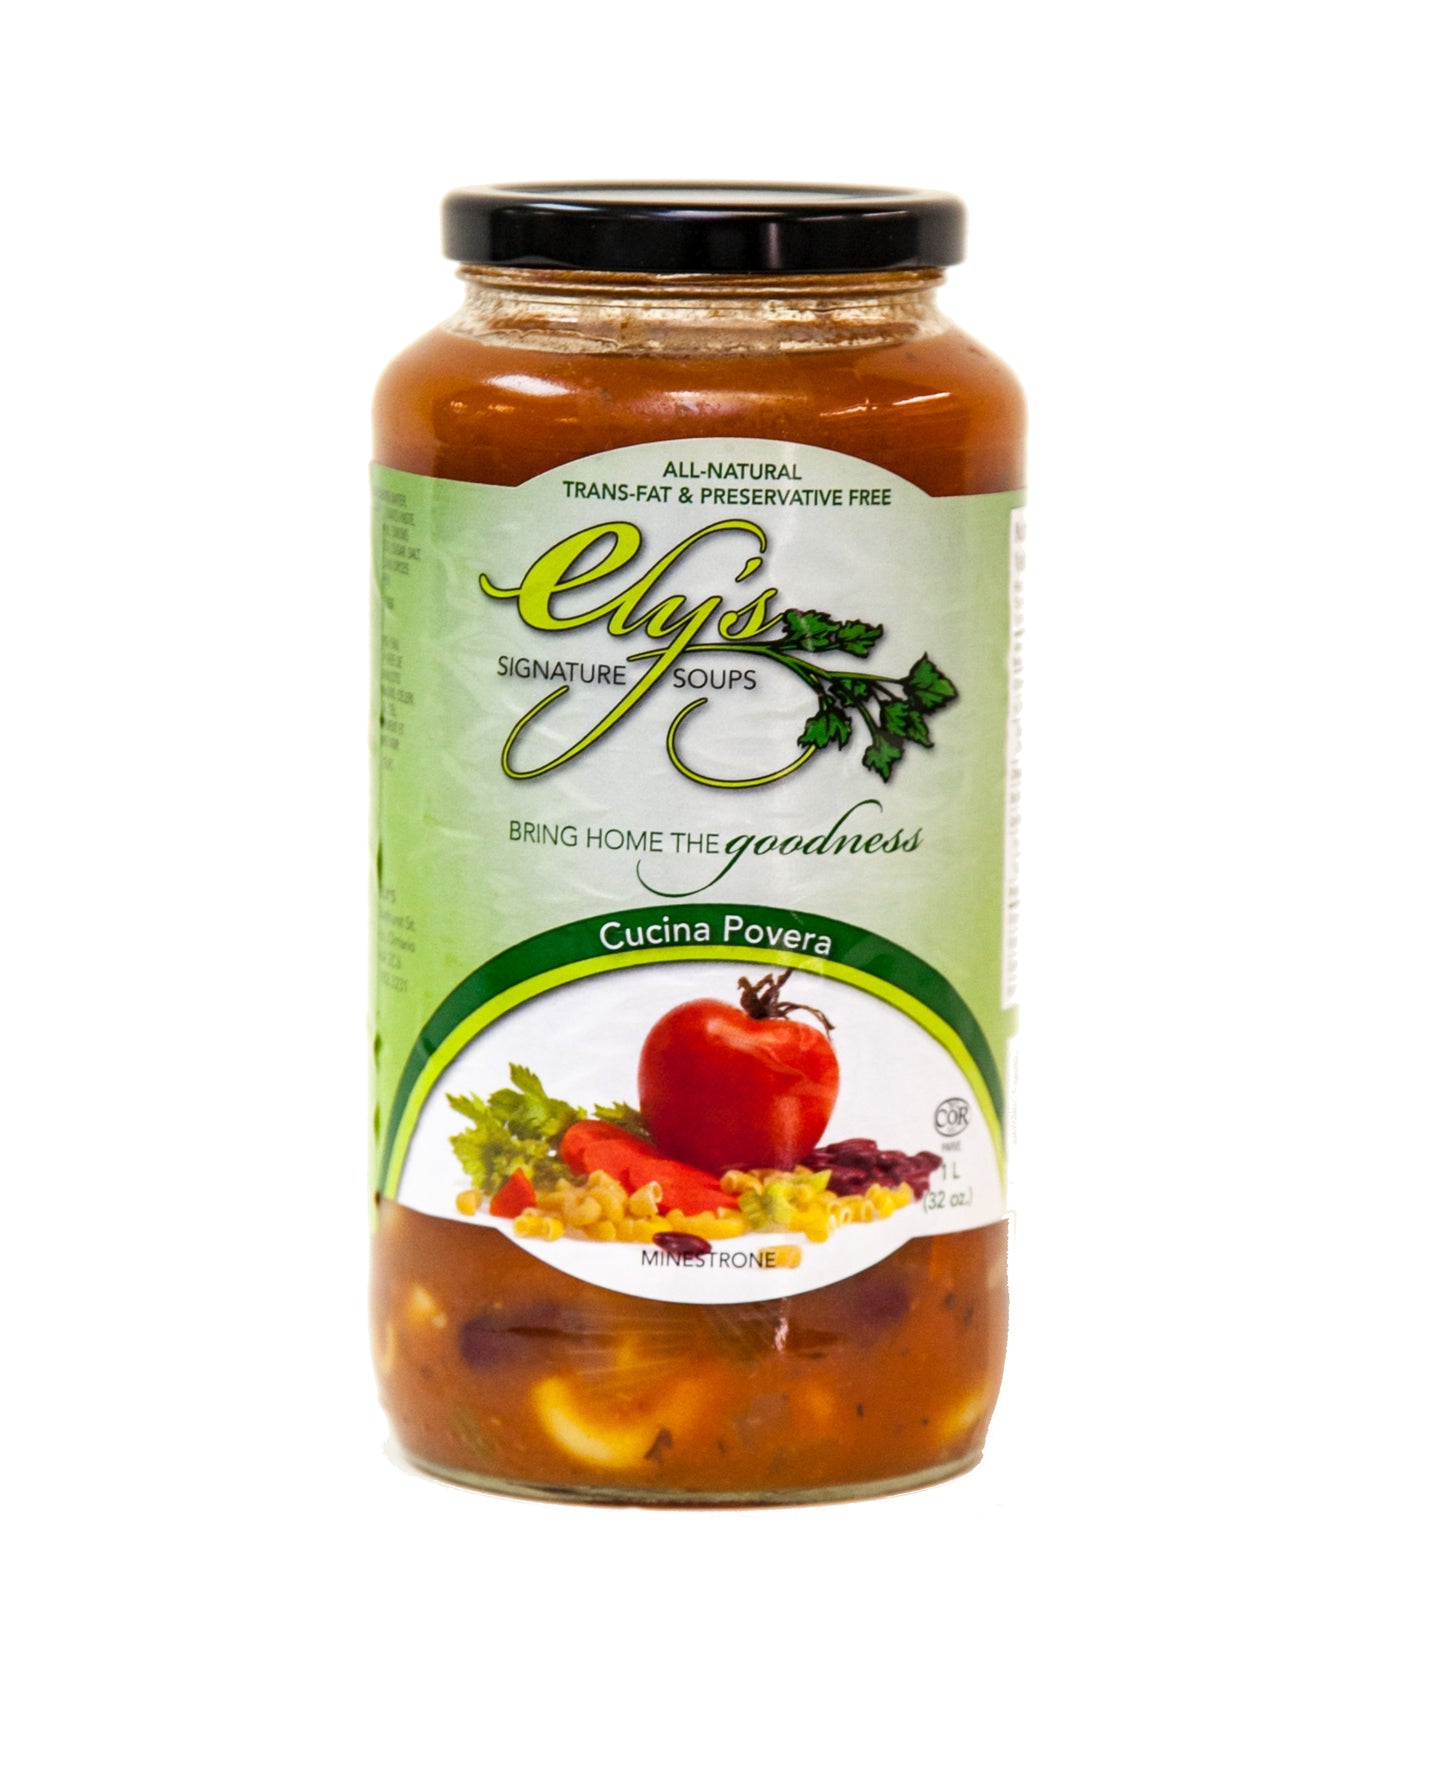 Minestrone Soup in a jar made by Ely's Fine Foods